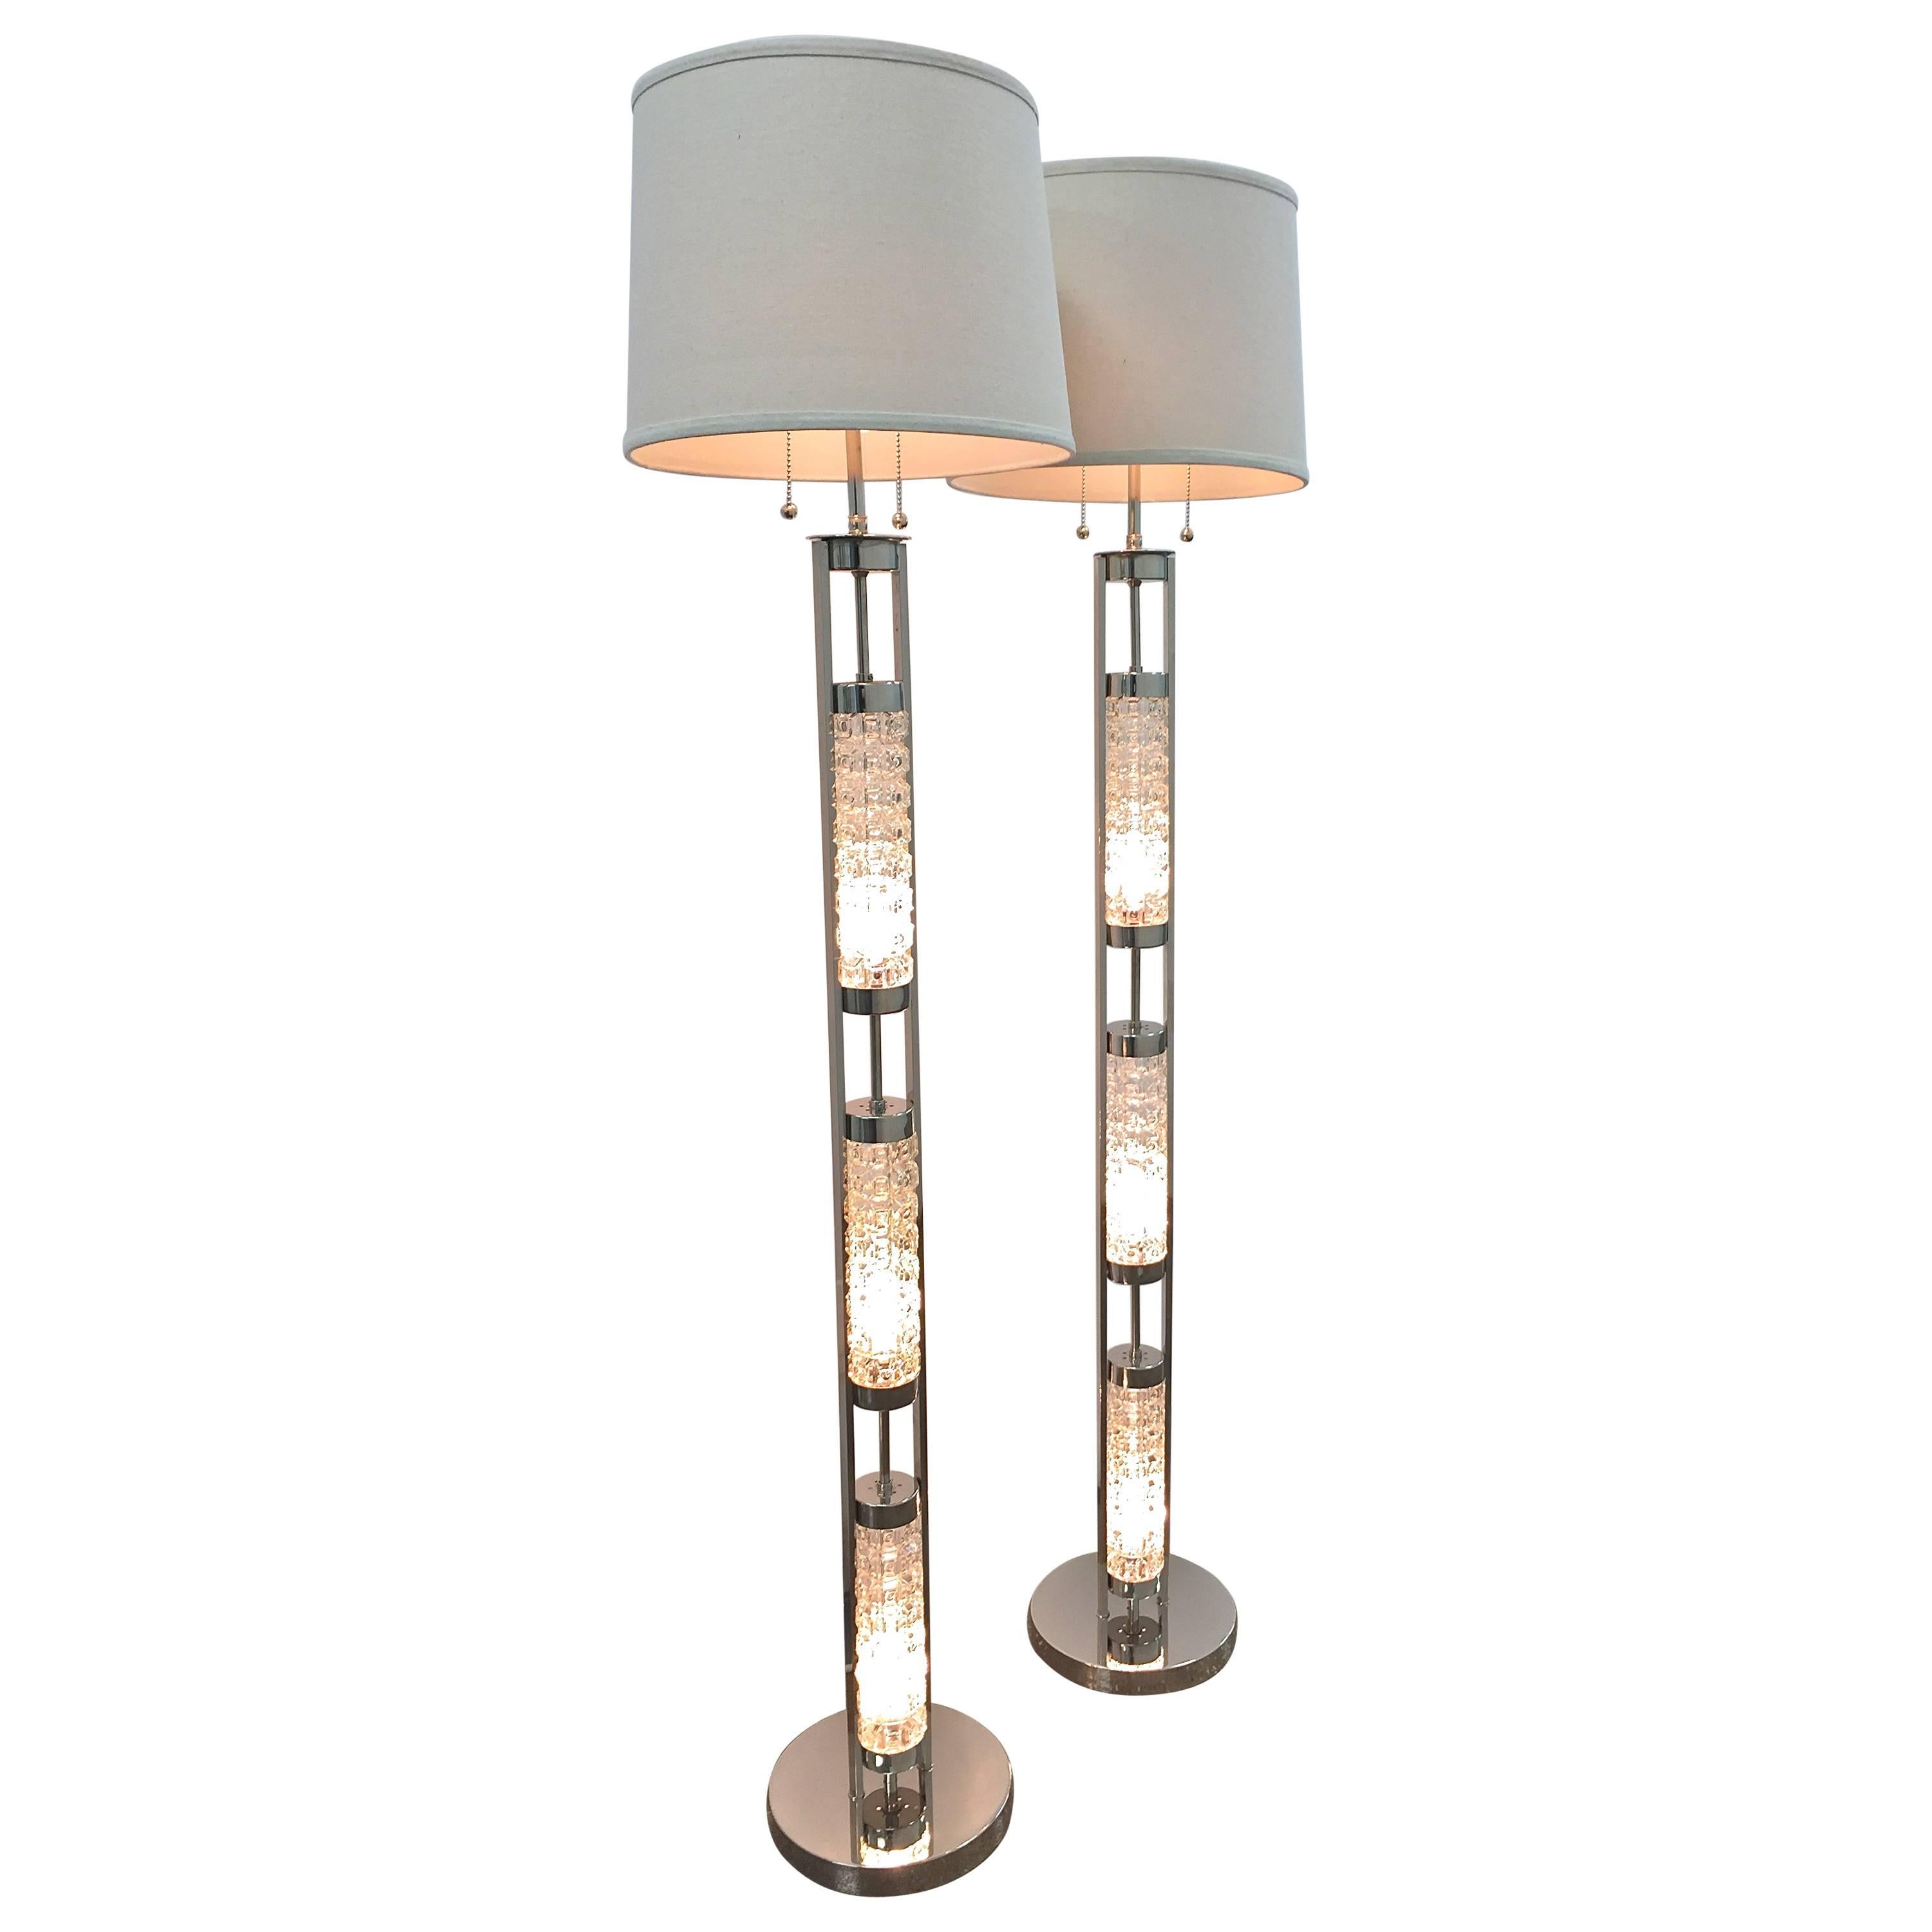 Pair of Floor Lamps in the Orrefors Style